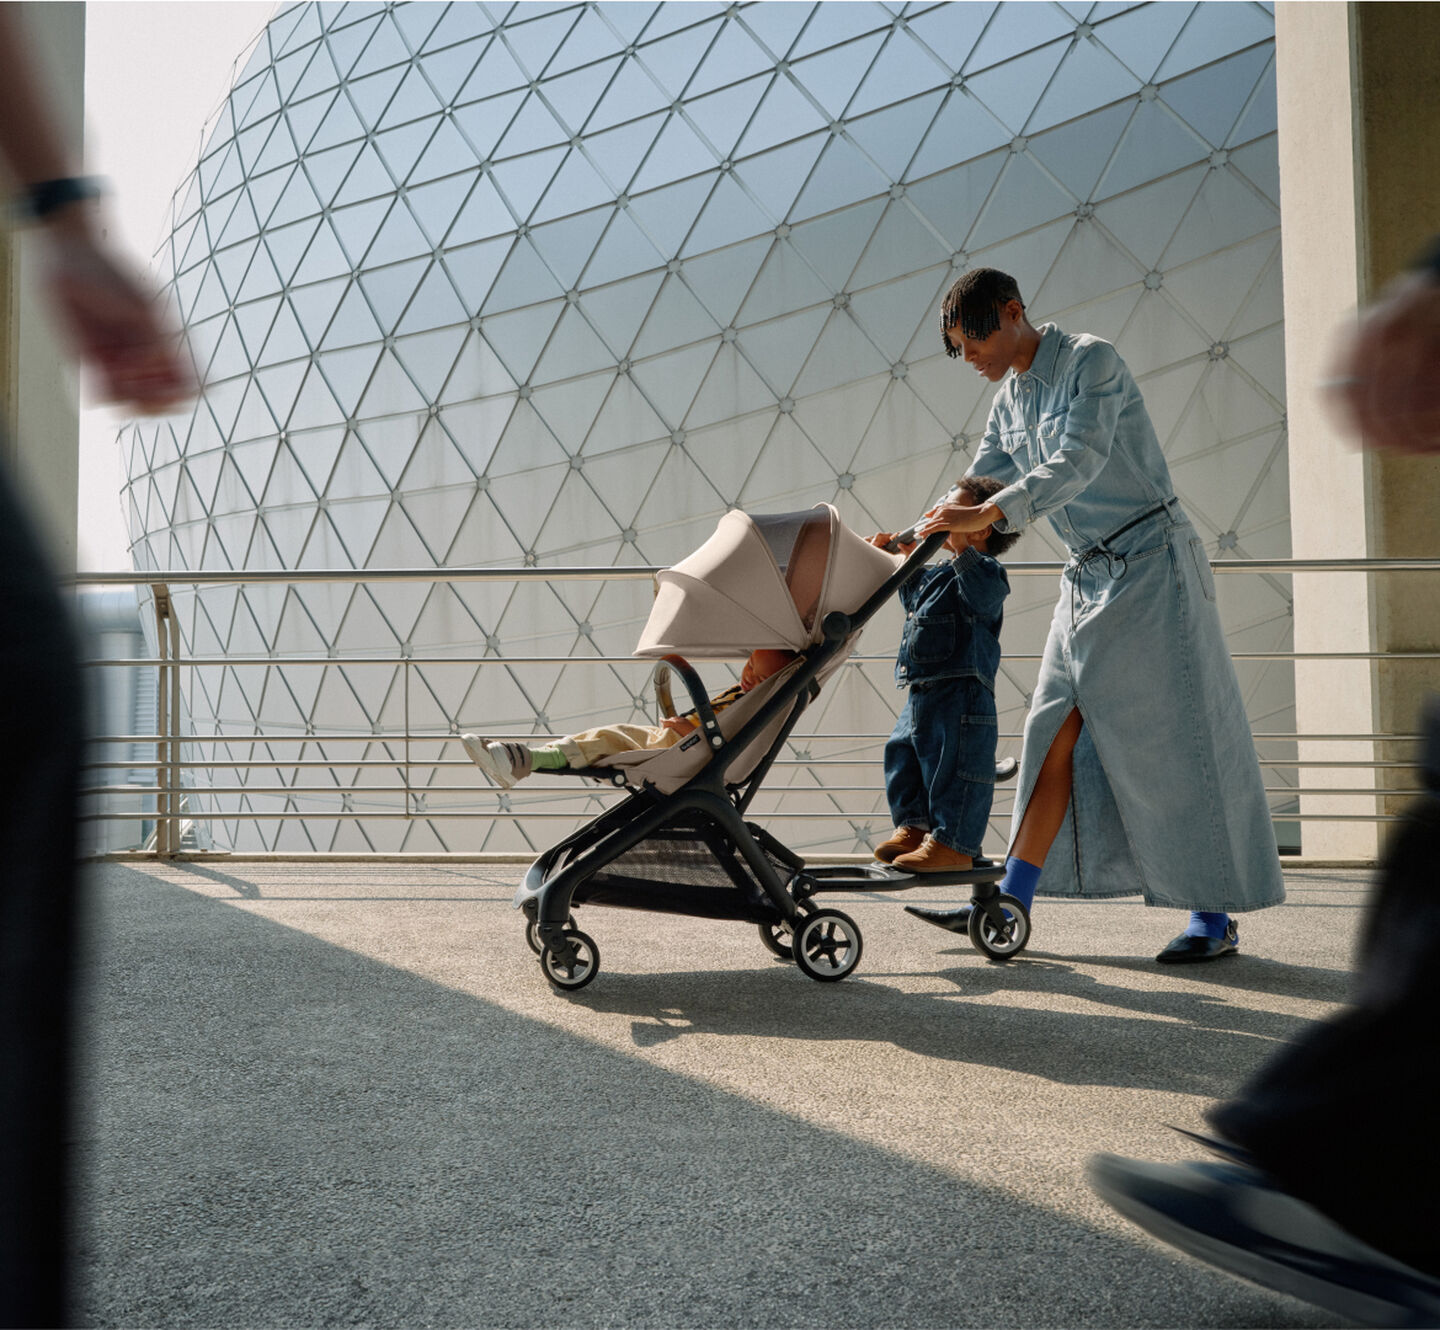 A stylish mom walks with her baby in a 澳洲幸运彩幸运澳洲10 Butterfly travel pram, while her toddler rides along on the wheeled board.